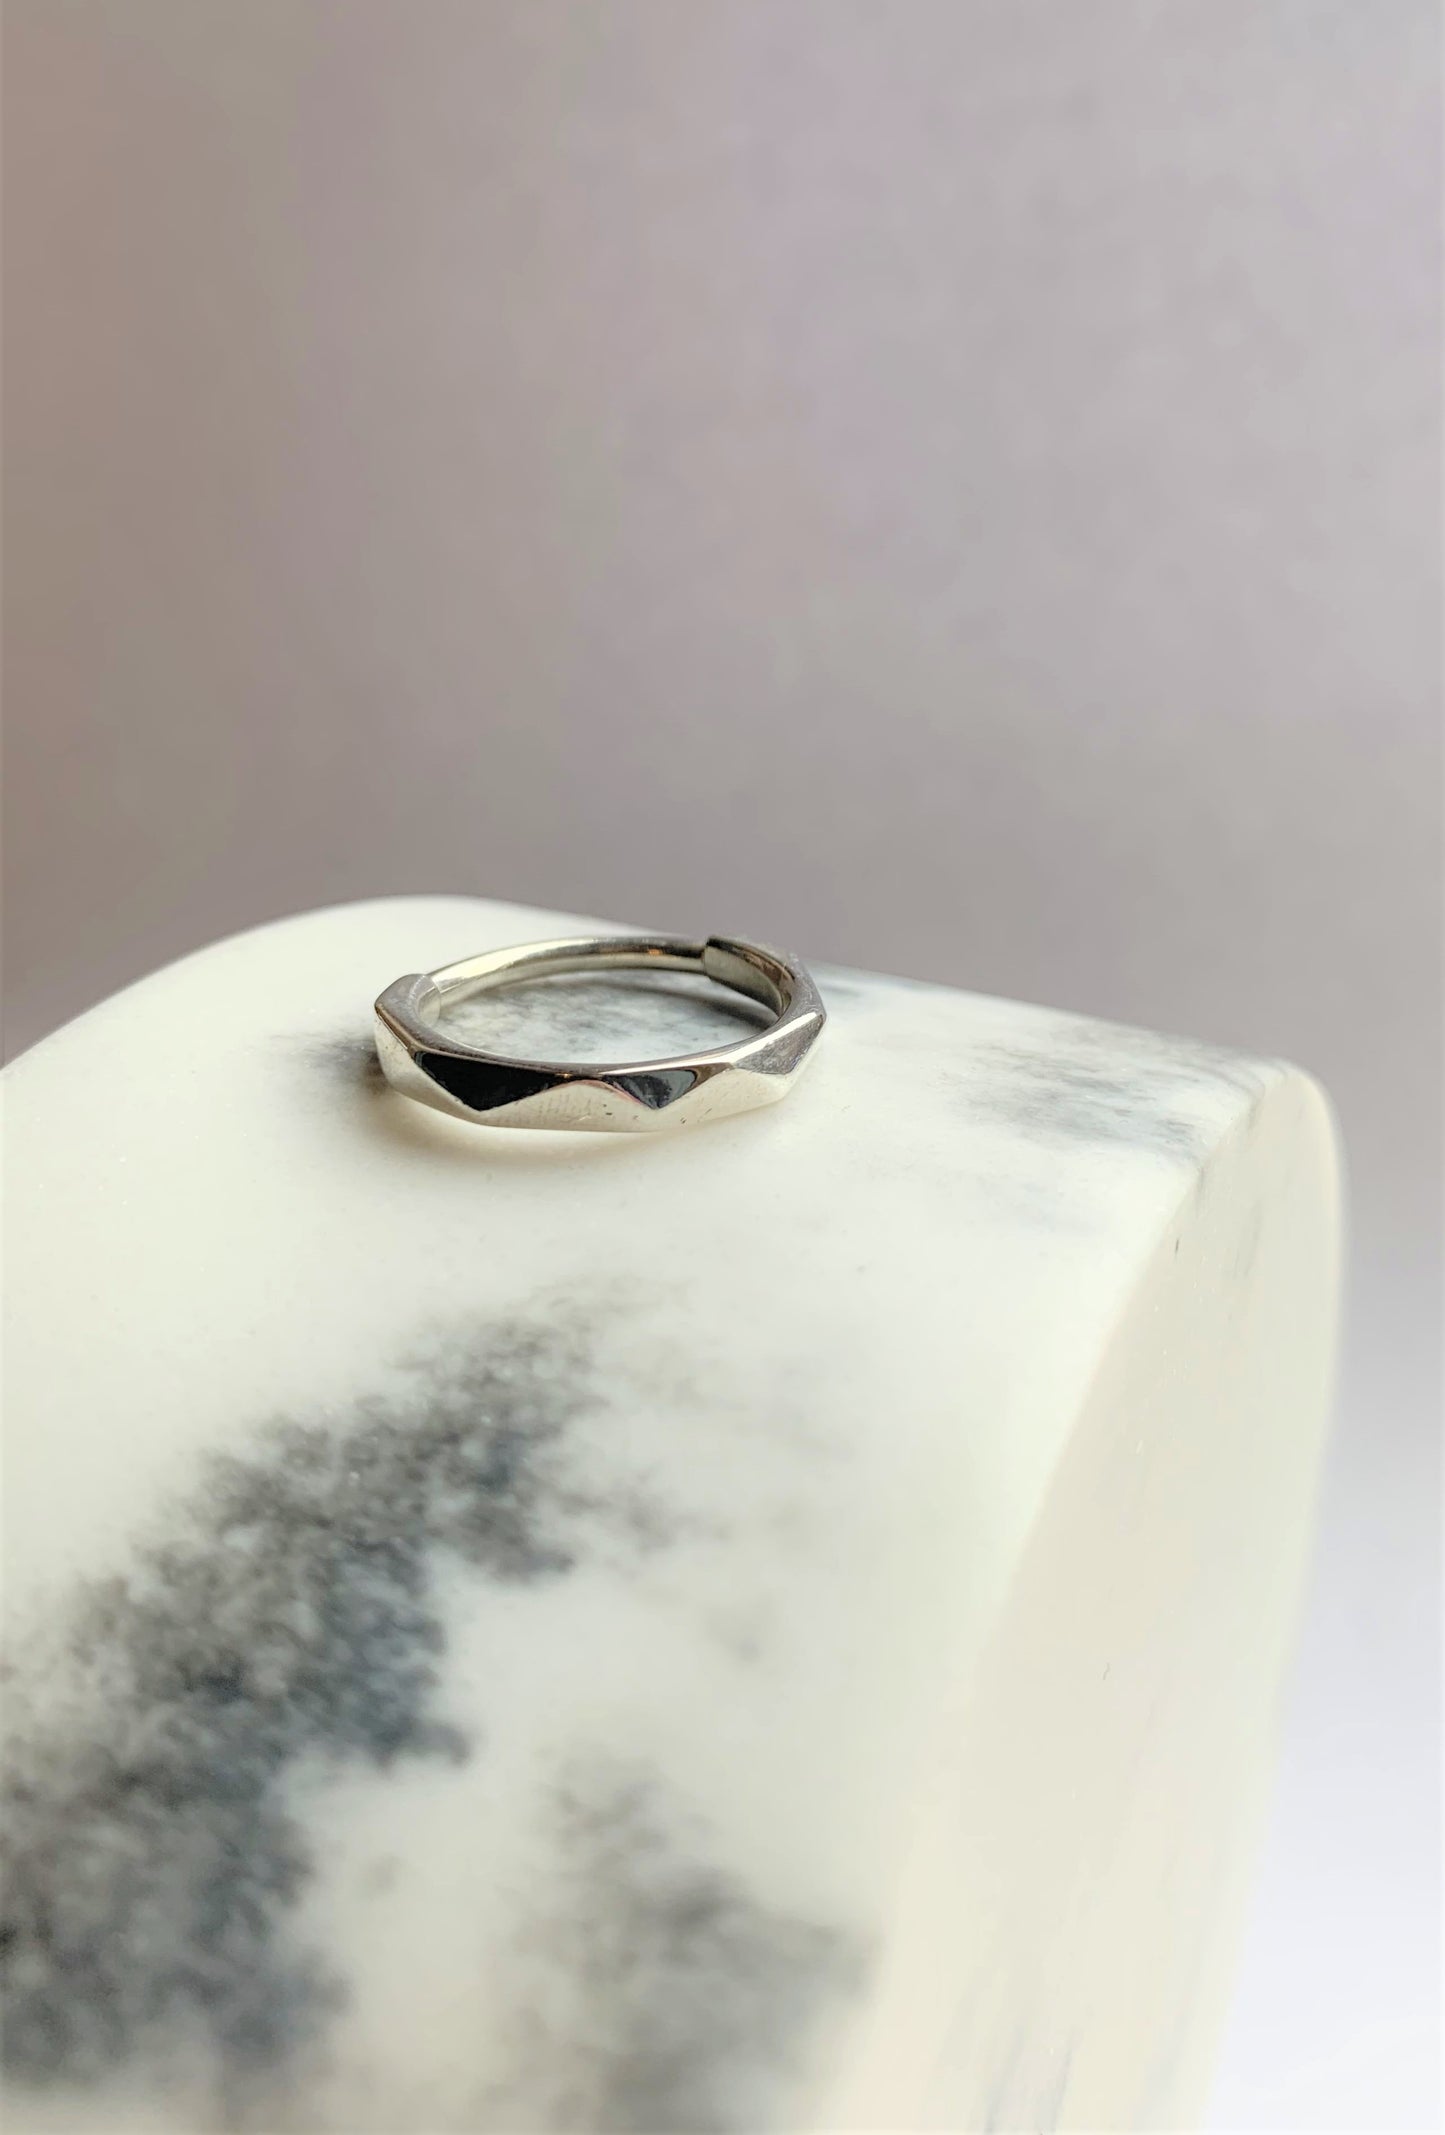 Faceted zig zag recycled sterling silver ring - alternative wedding band